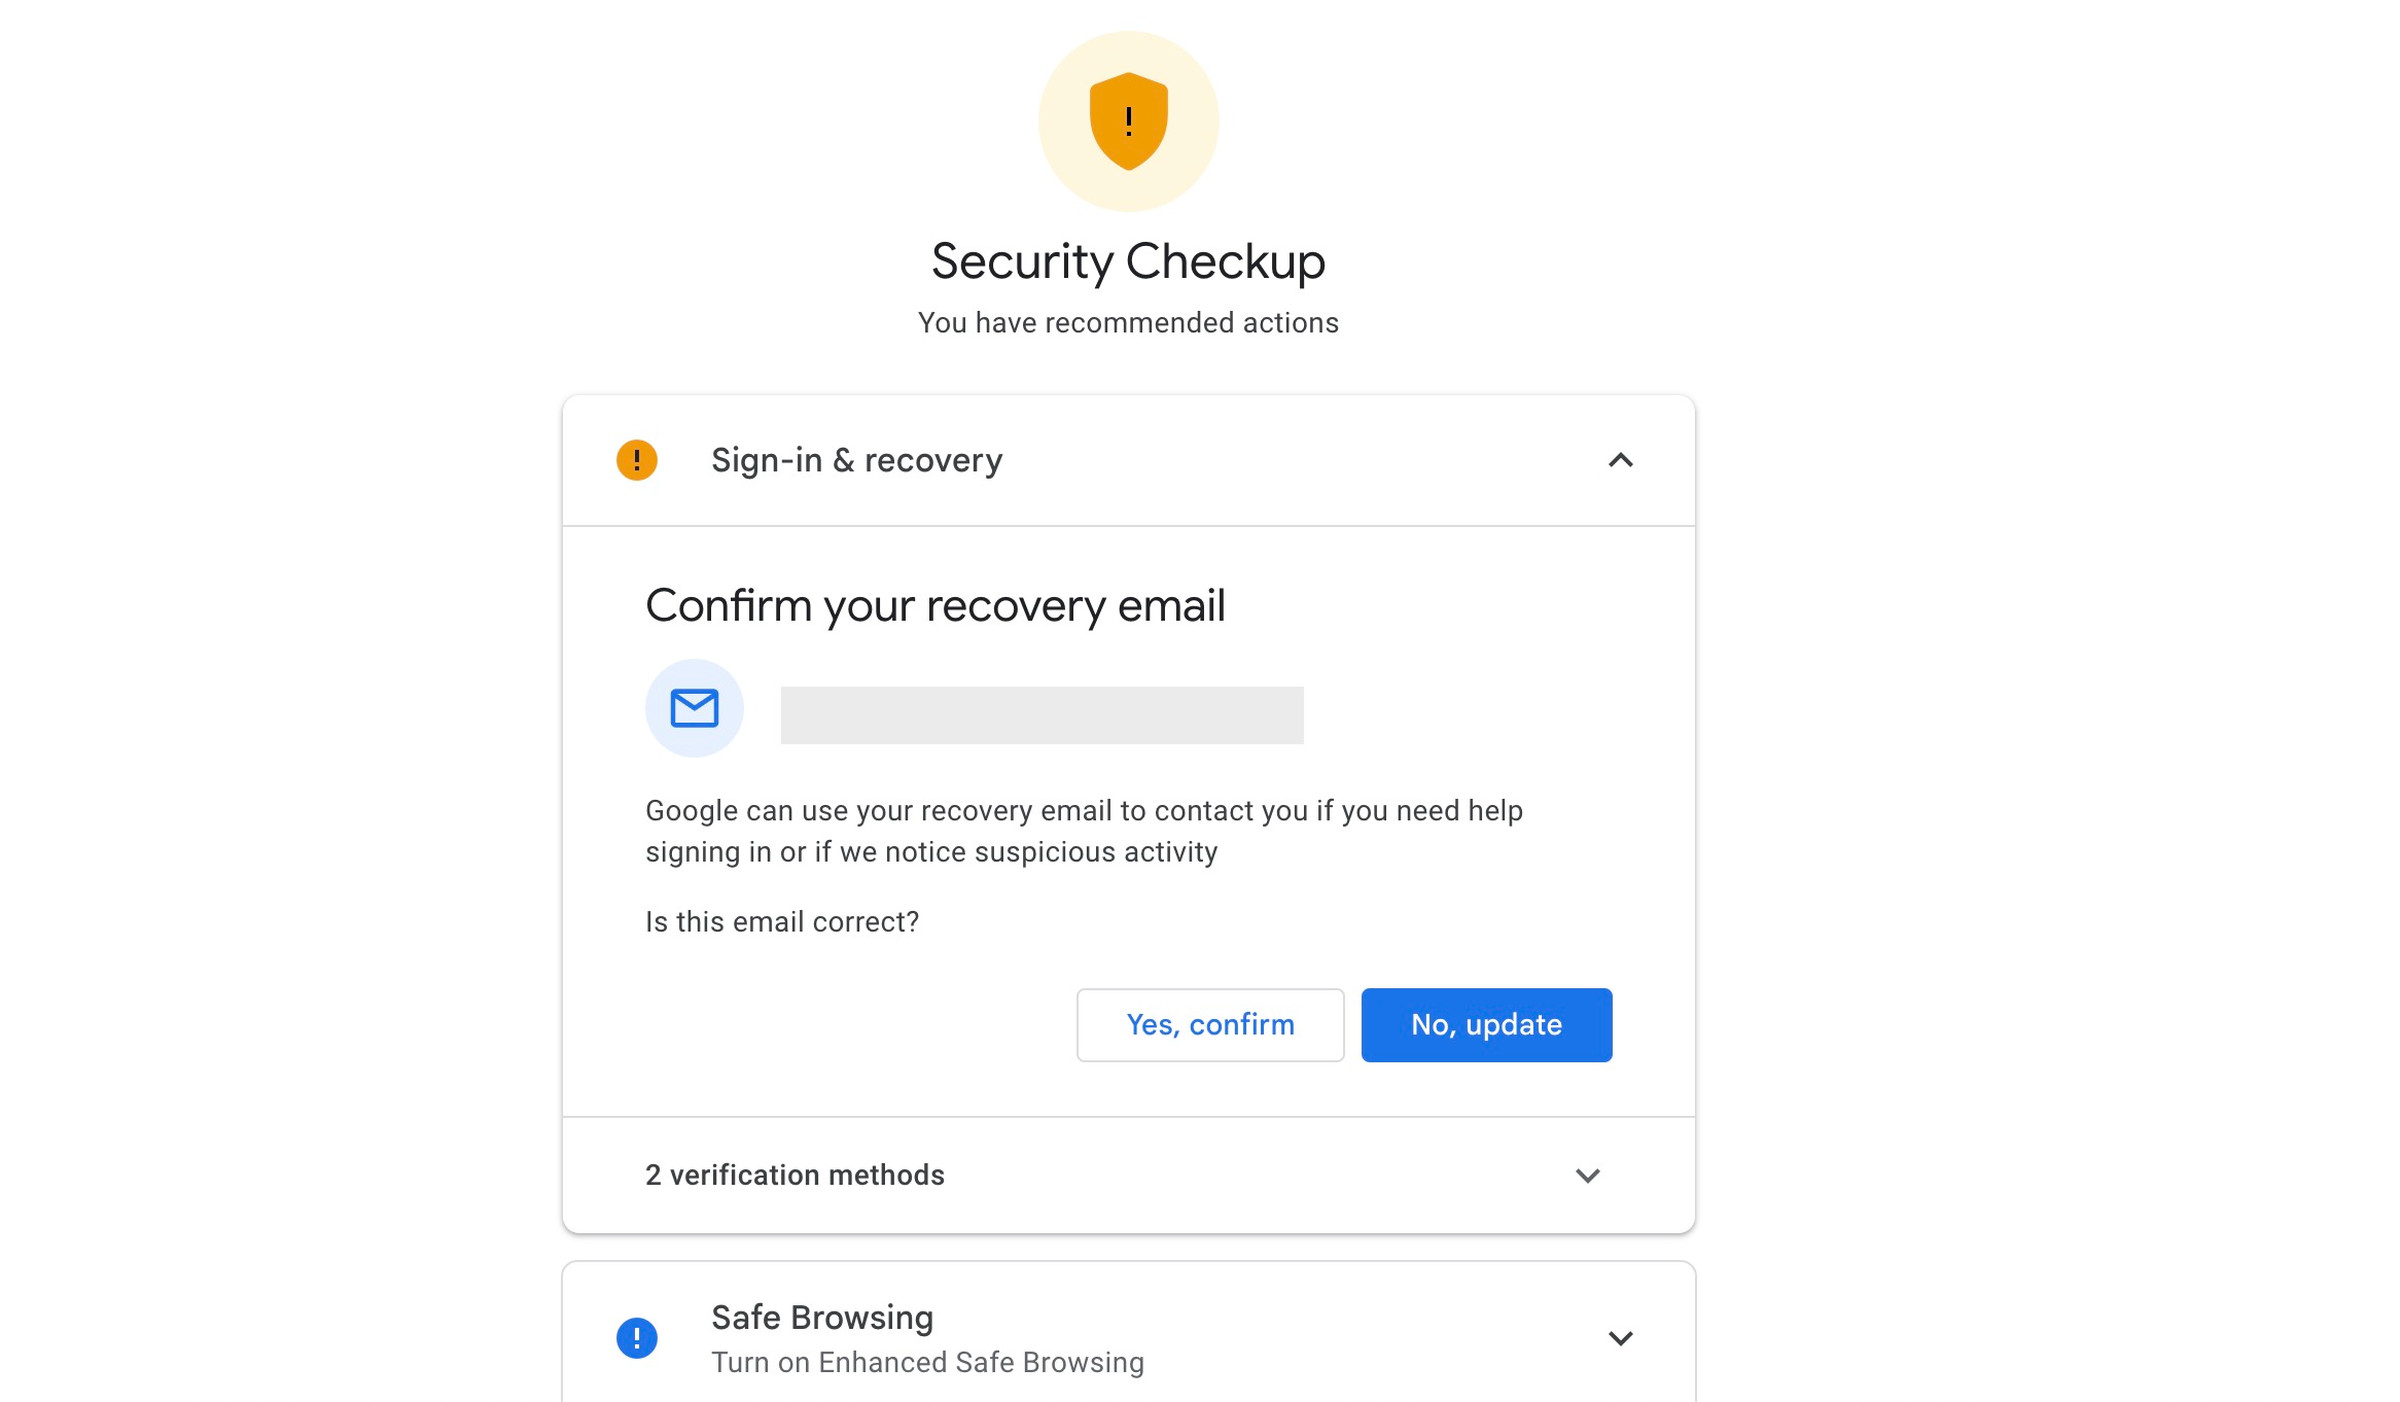 Security checkup page with a box asking you to confirm your recovery email.